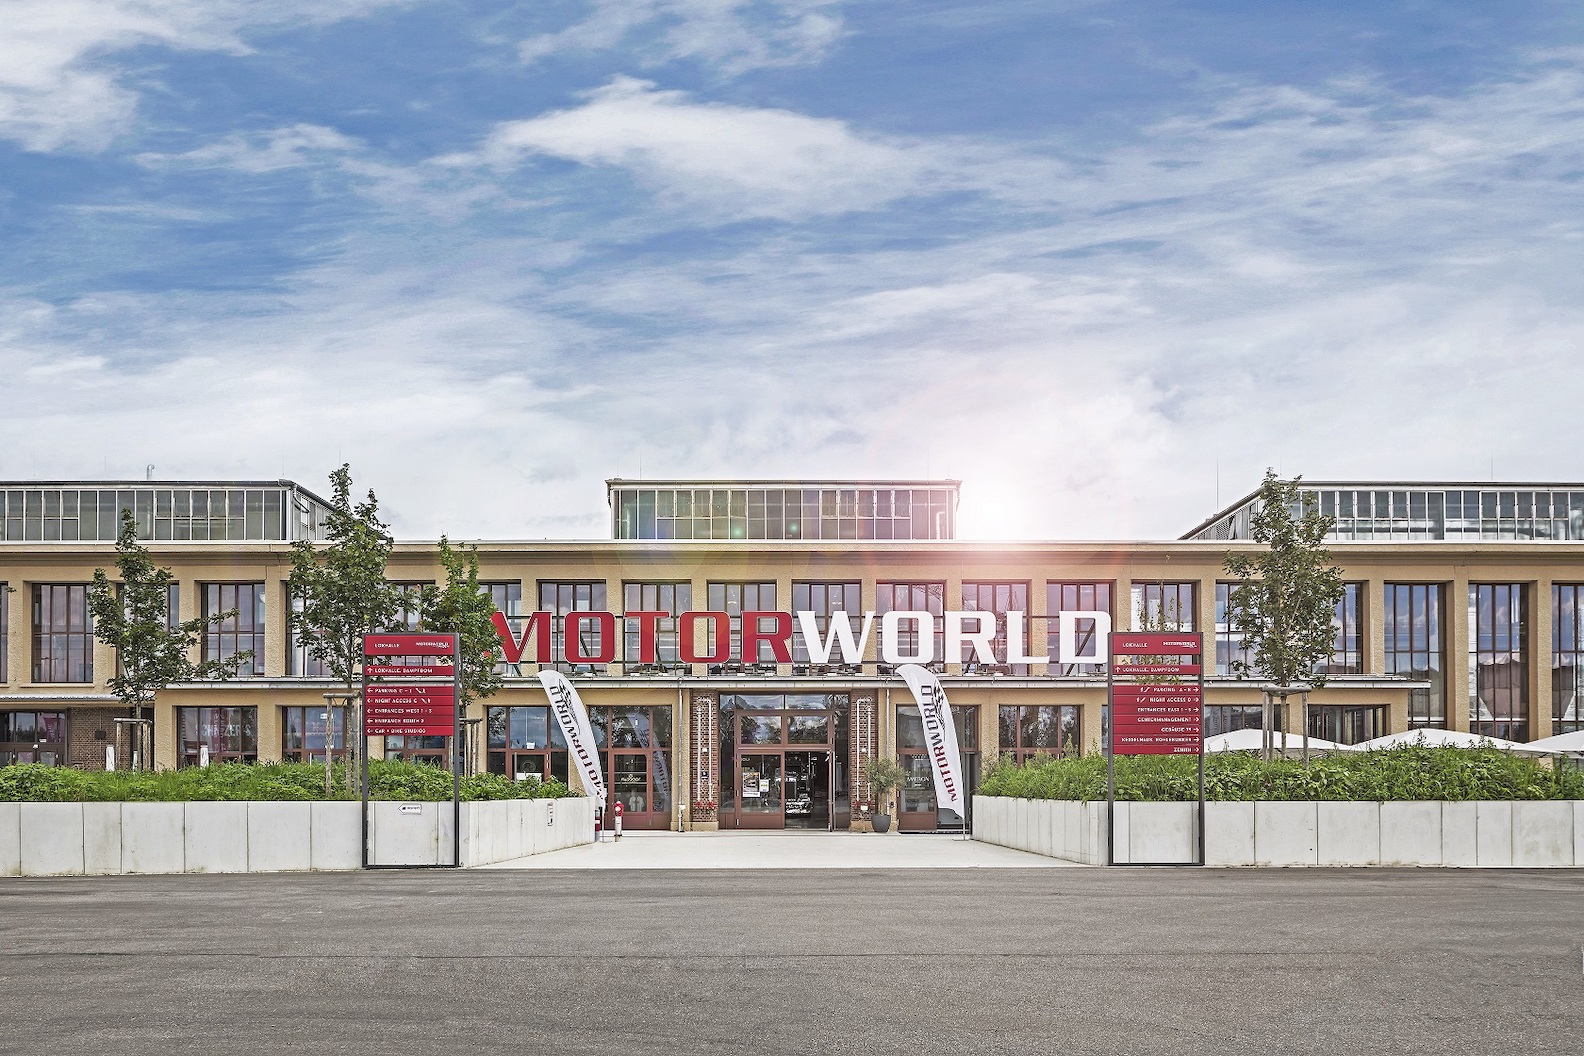 Premiere der „MOTORWORLD Mobility Days – the magic of cars“